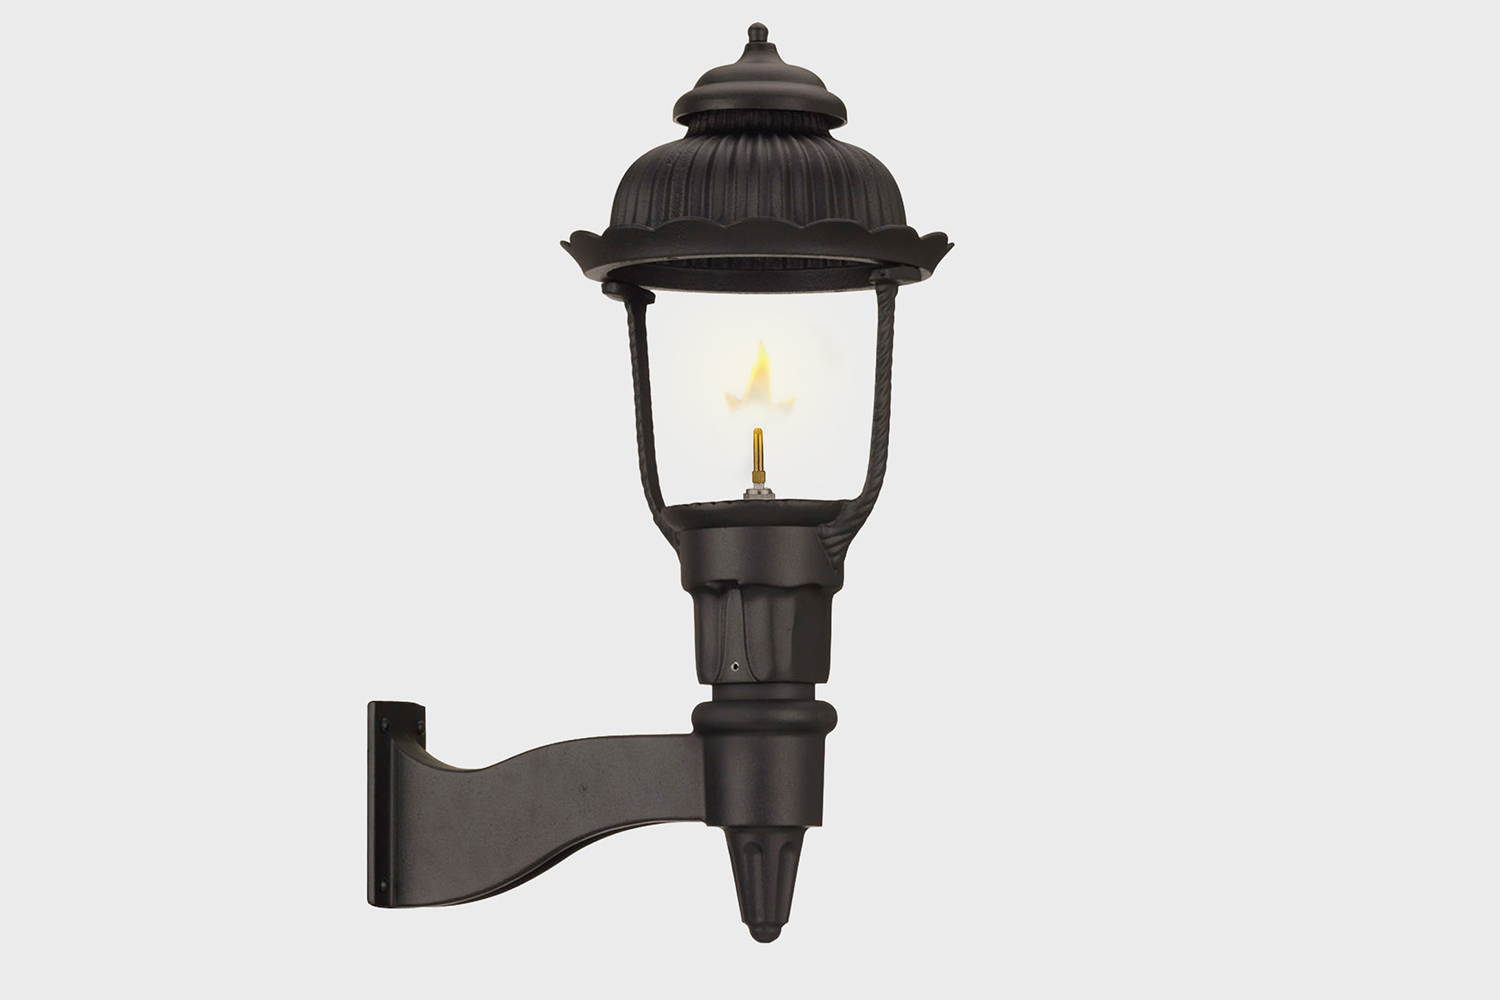 heritage gas light from american gas lamp